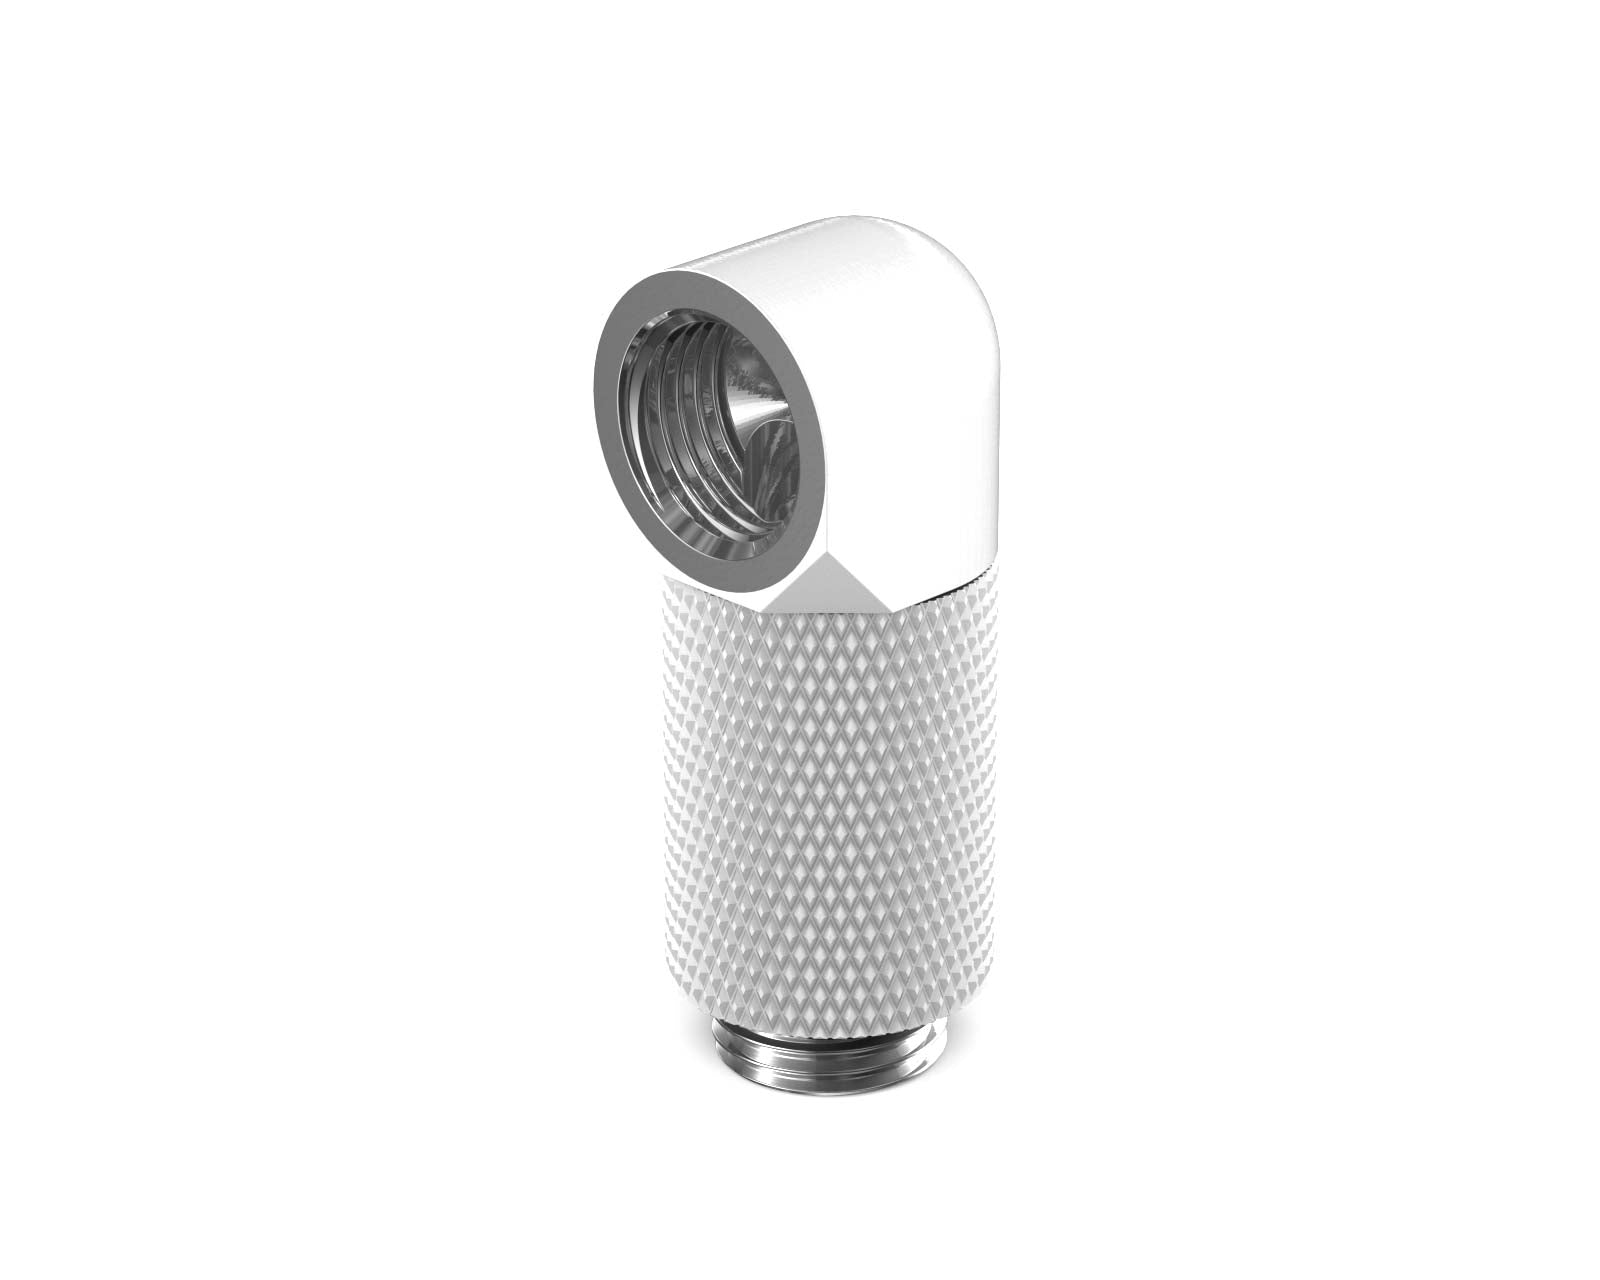 PrimoChill Male to Female G 1/4in. 90 Degree SX Rotary 25mm Extension Elbow Fitting - PrimoChill - KEEPING IT COOL Sky White